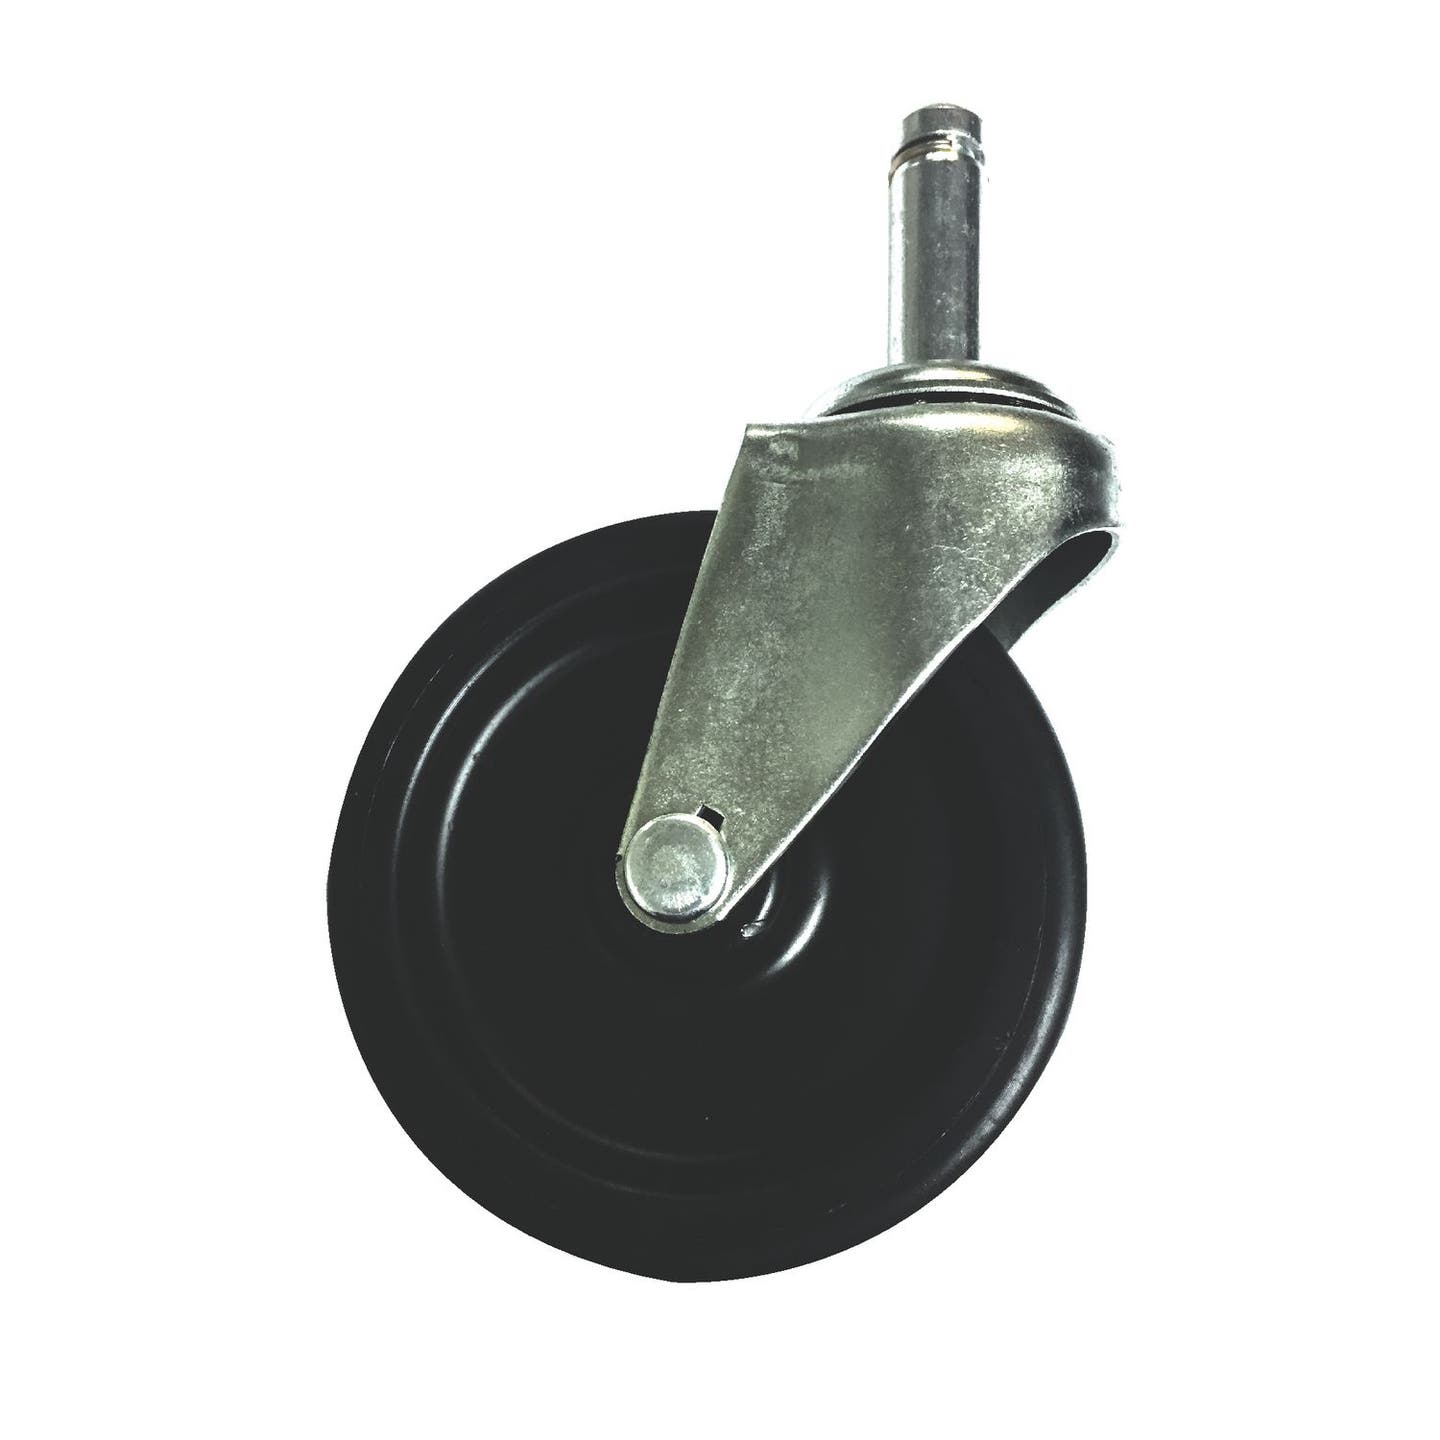 REPLACEMENT CASTERS FOR DELUXE PADDED CREEPER SEAT CS4D